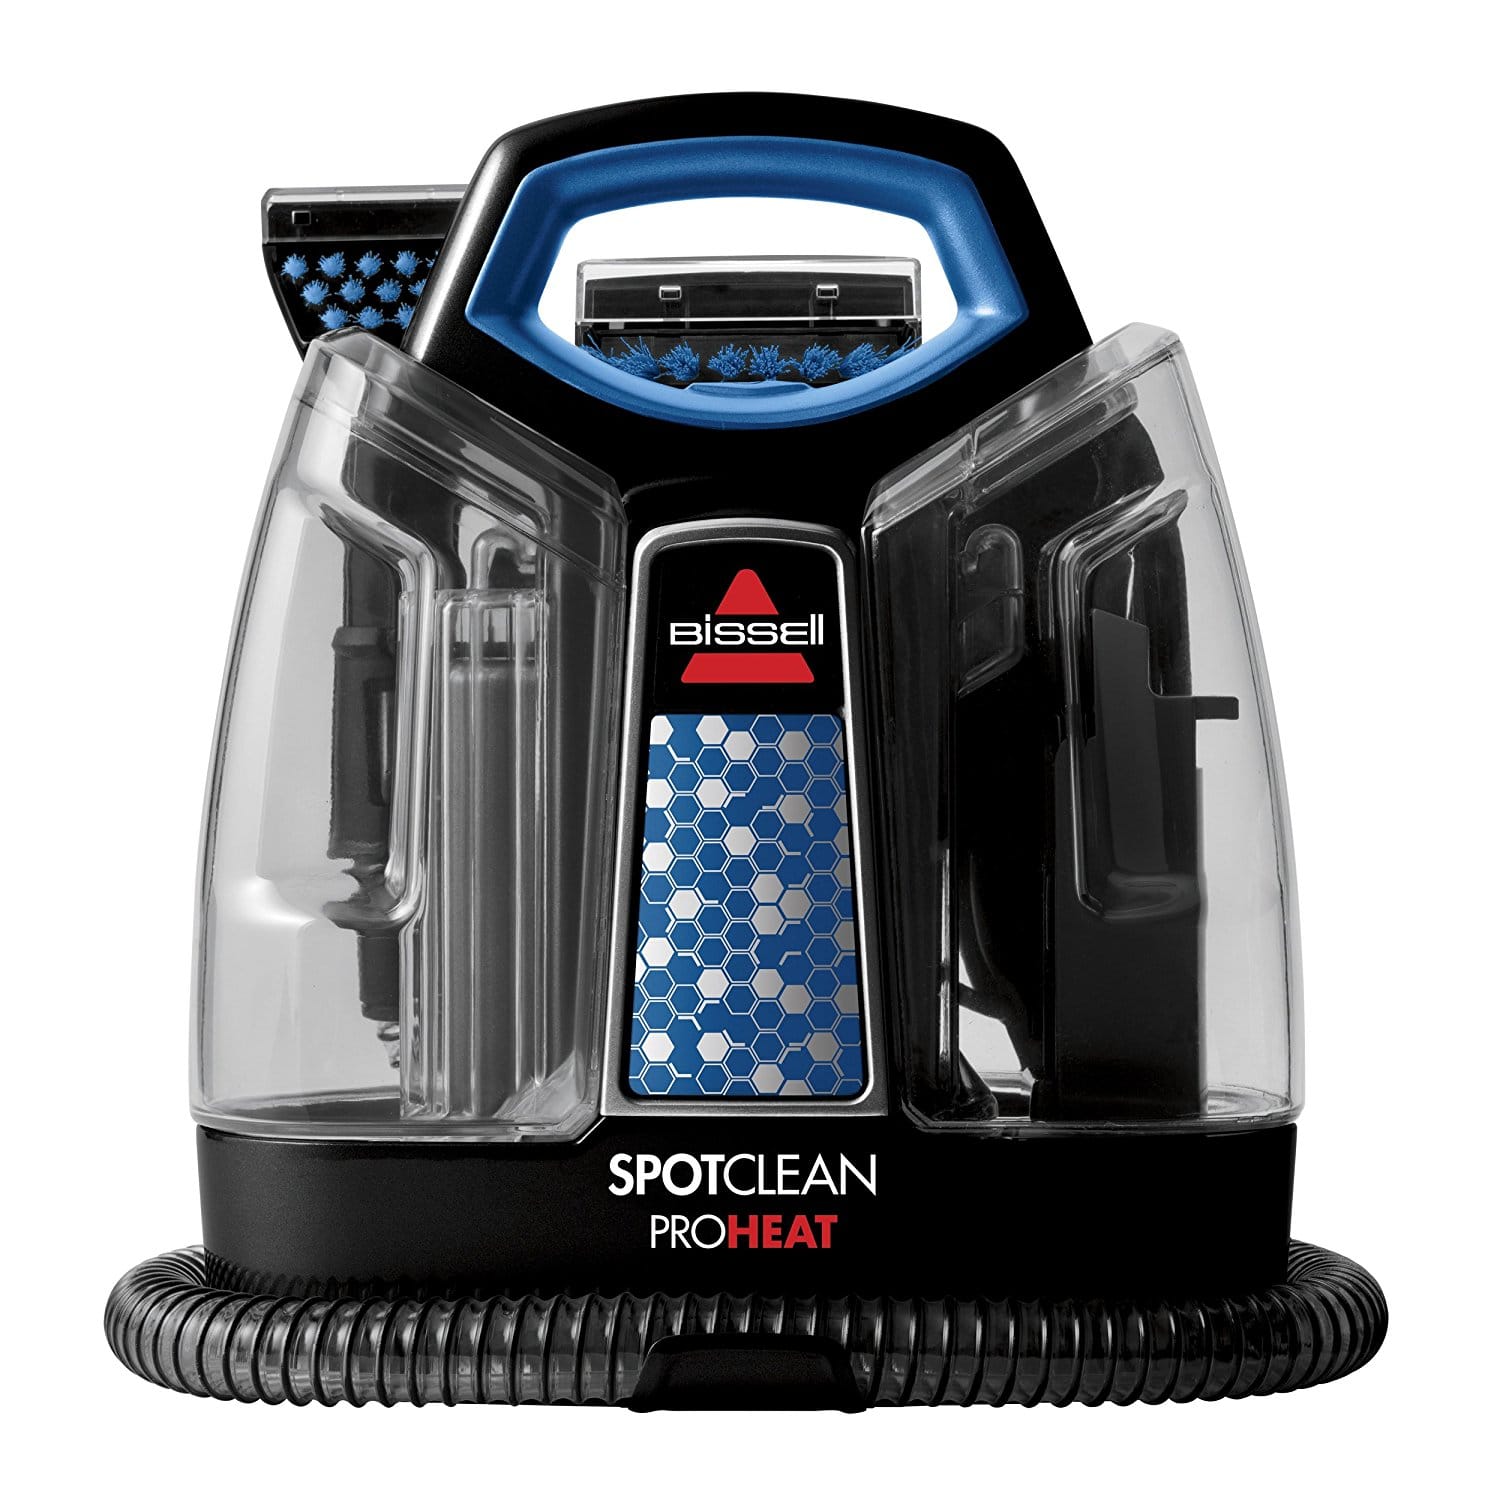 The Best Portable Steam Cleaners